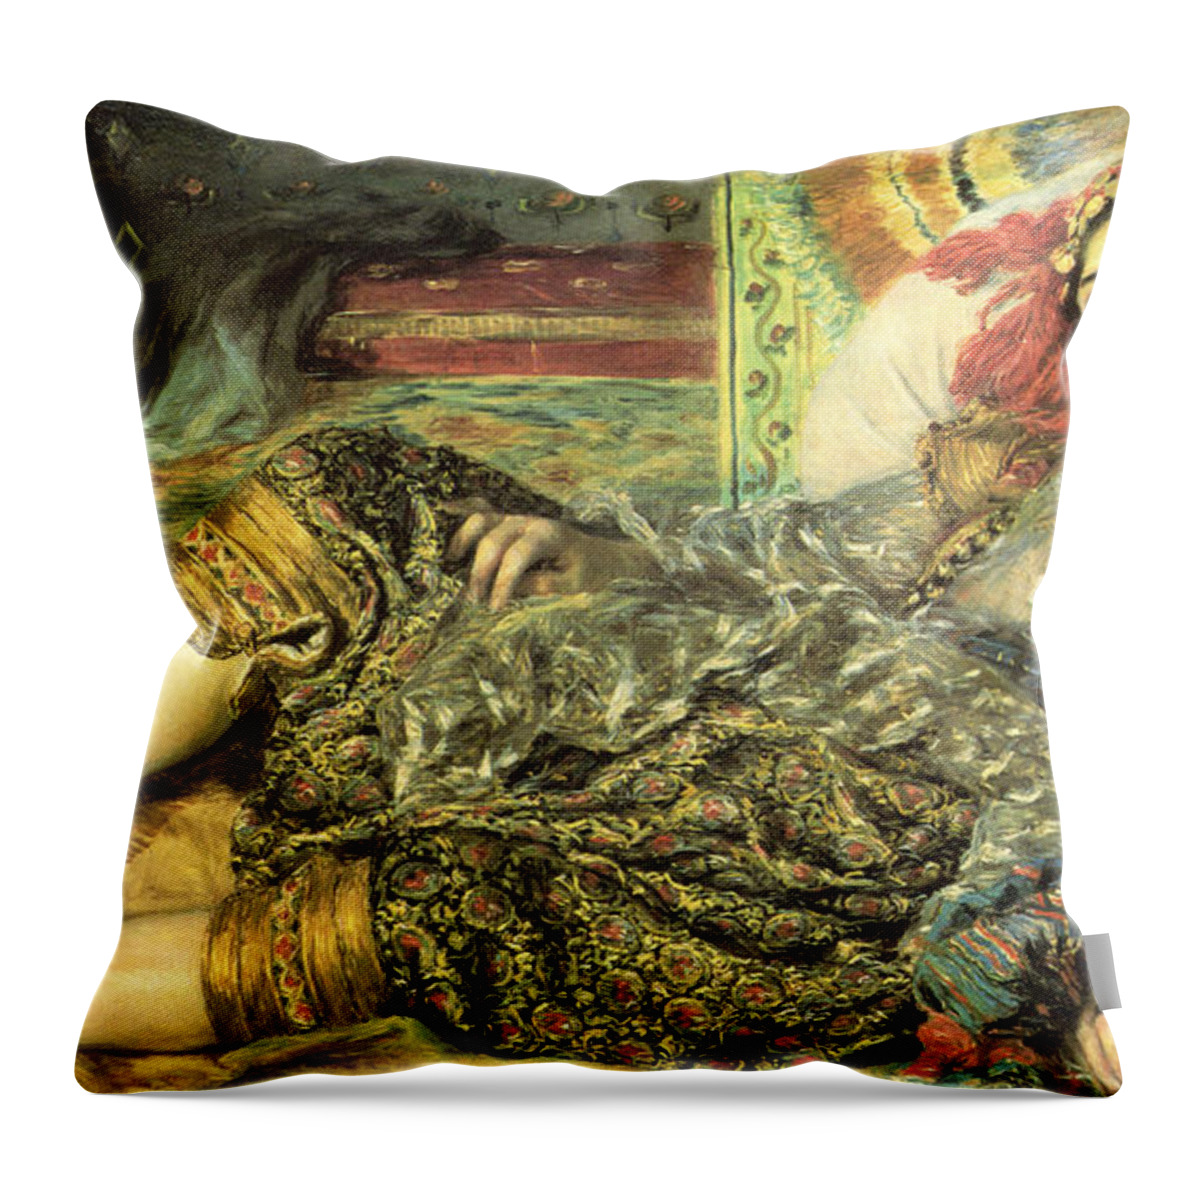 Old Masters Throw Pillow featuring the digital art Woman Of Algiers by Pierre Auguste Renoir